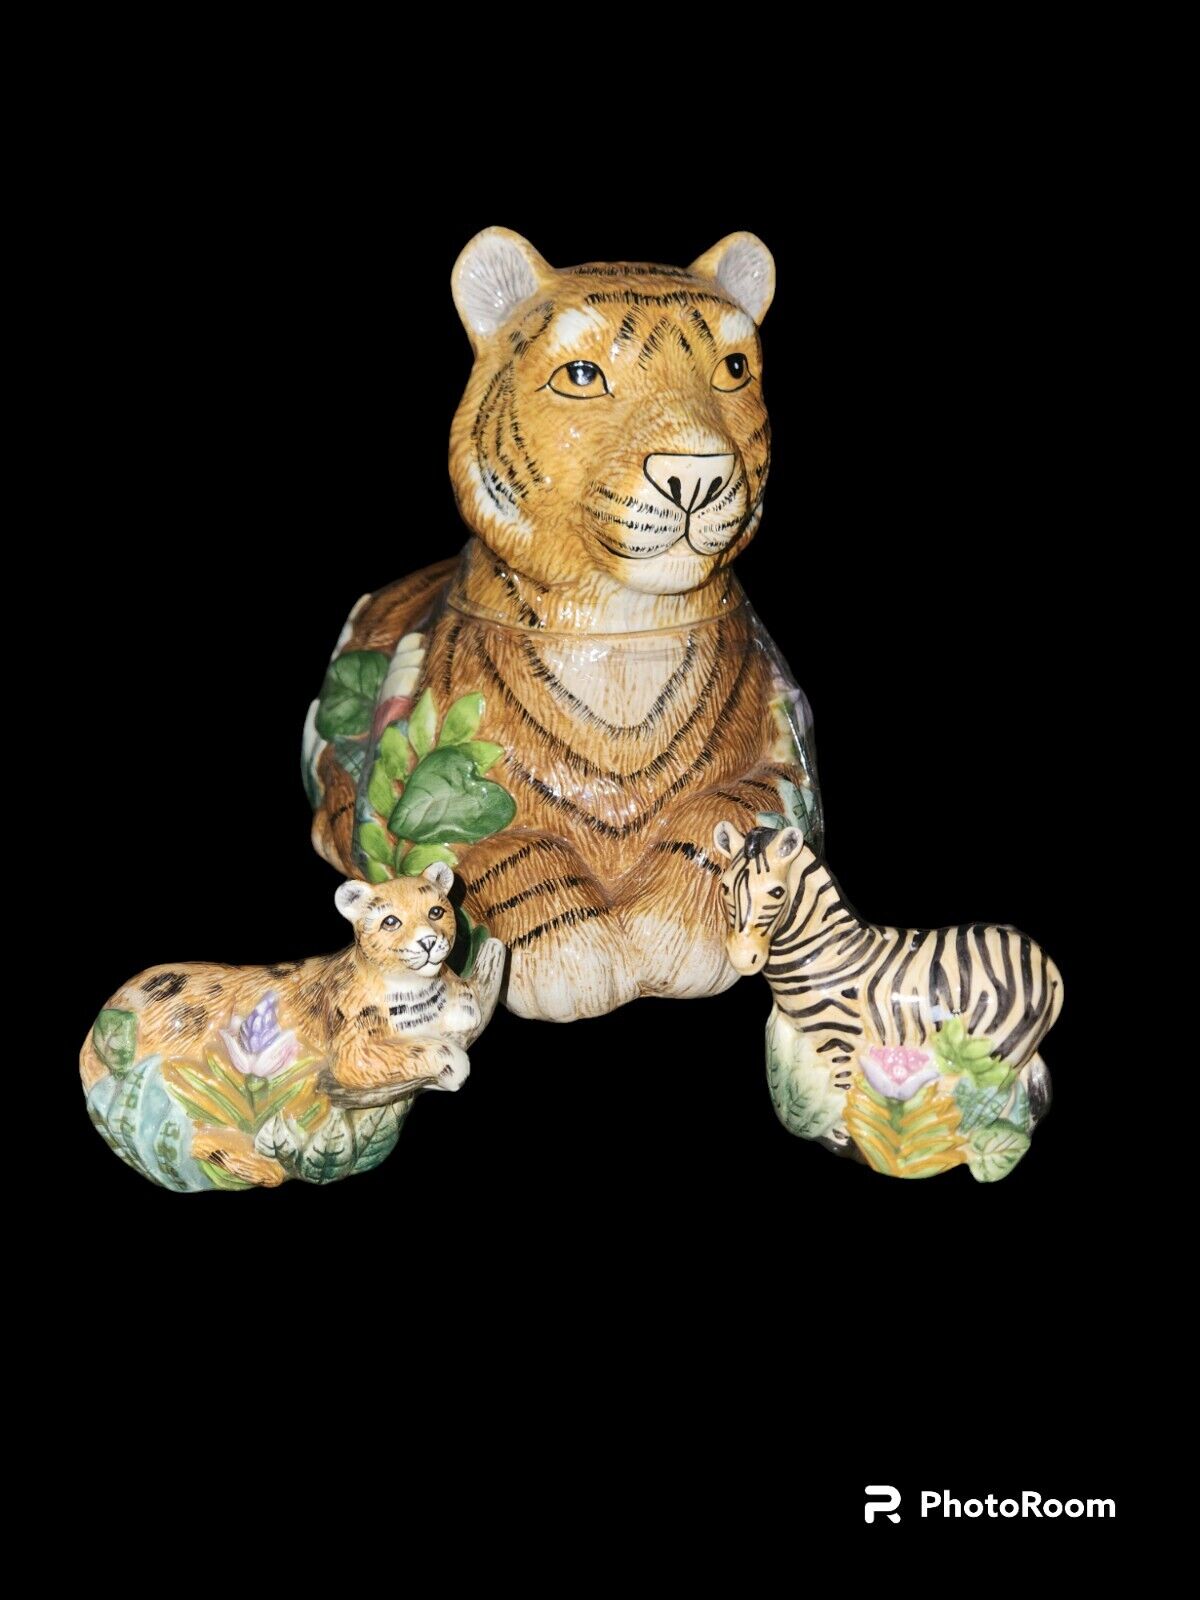 Vintage Sakura Table Jungle Stephanie Stouffer Tiger 1990s With Salt And Pepper